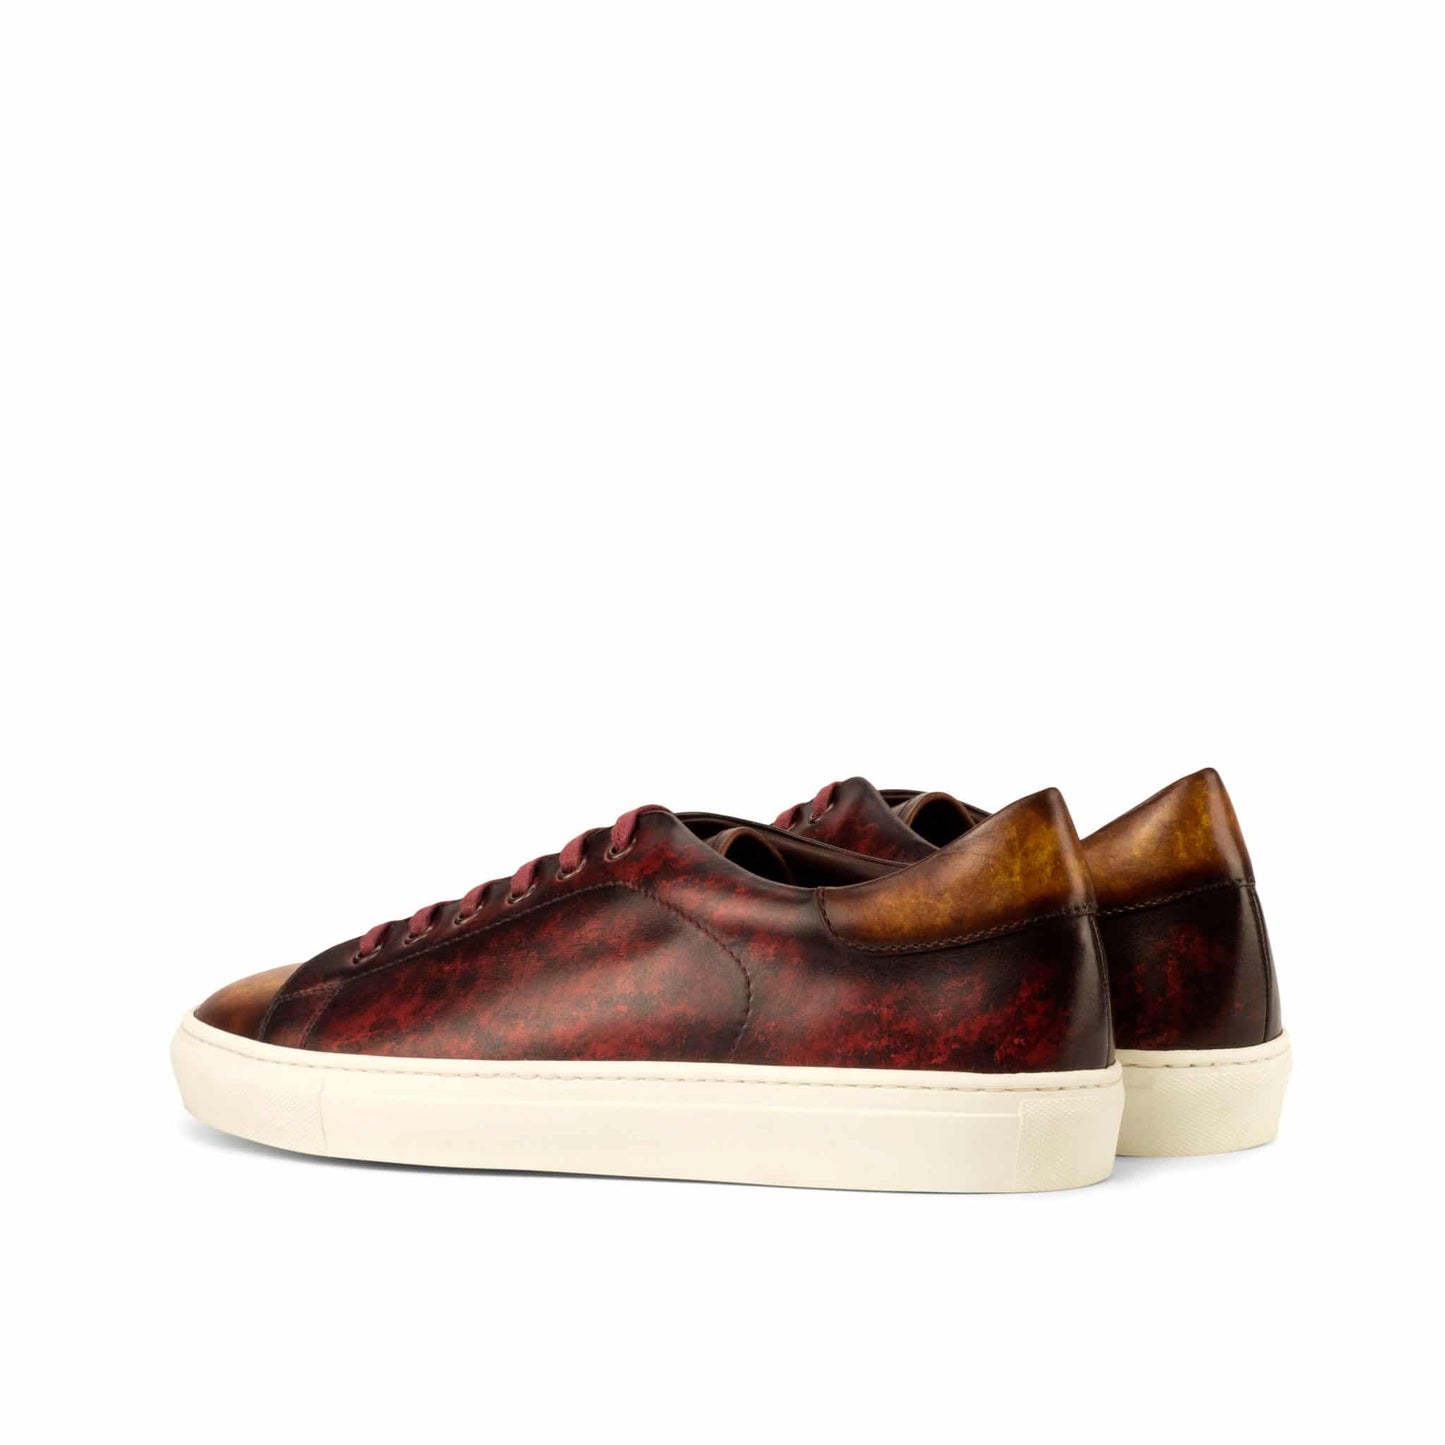 Tan Burgundy Patina Finish Leather Low Top Lace Up Sneaker for Men. White Comfortable Cup Sole.